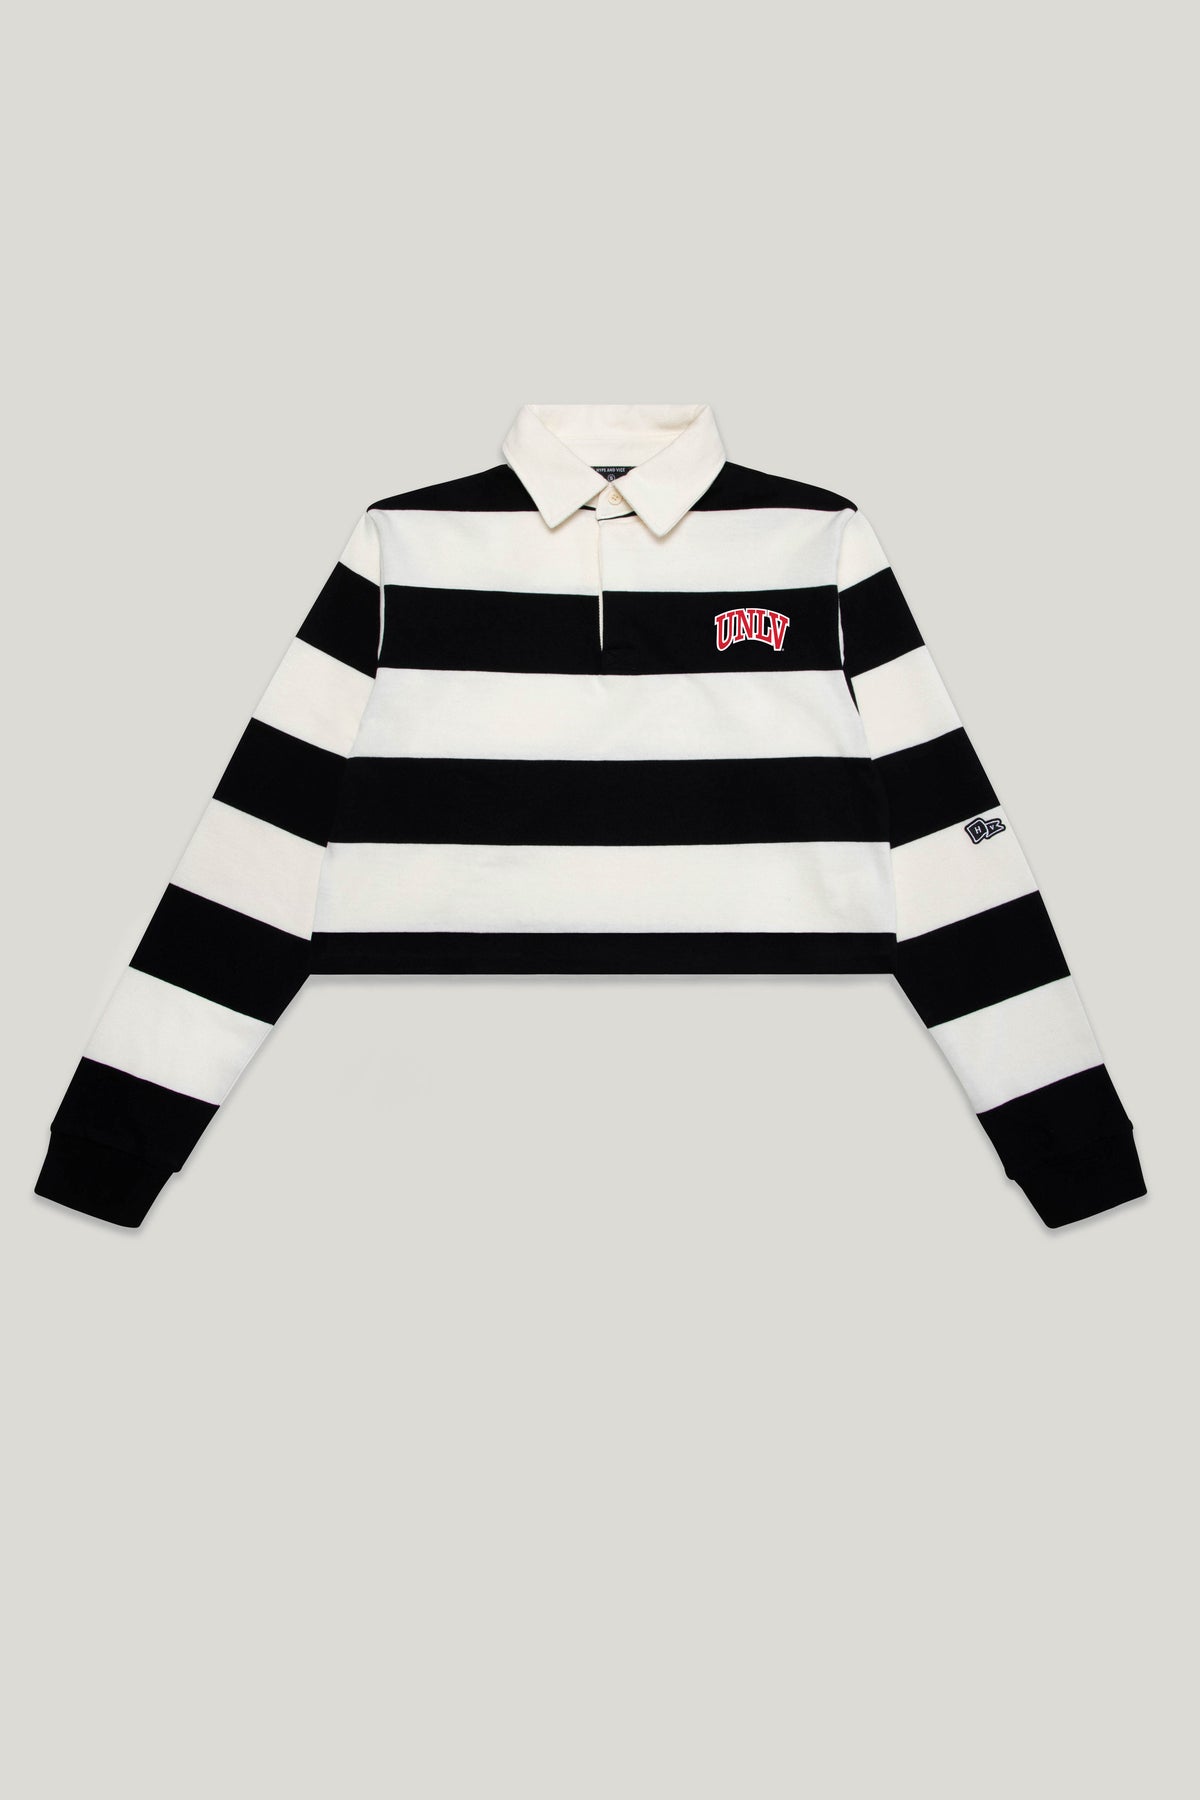 UNLV Rugby Top